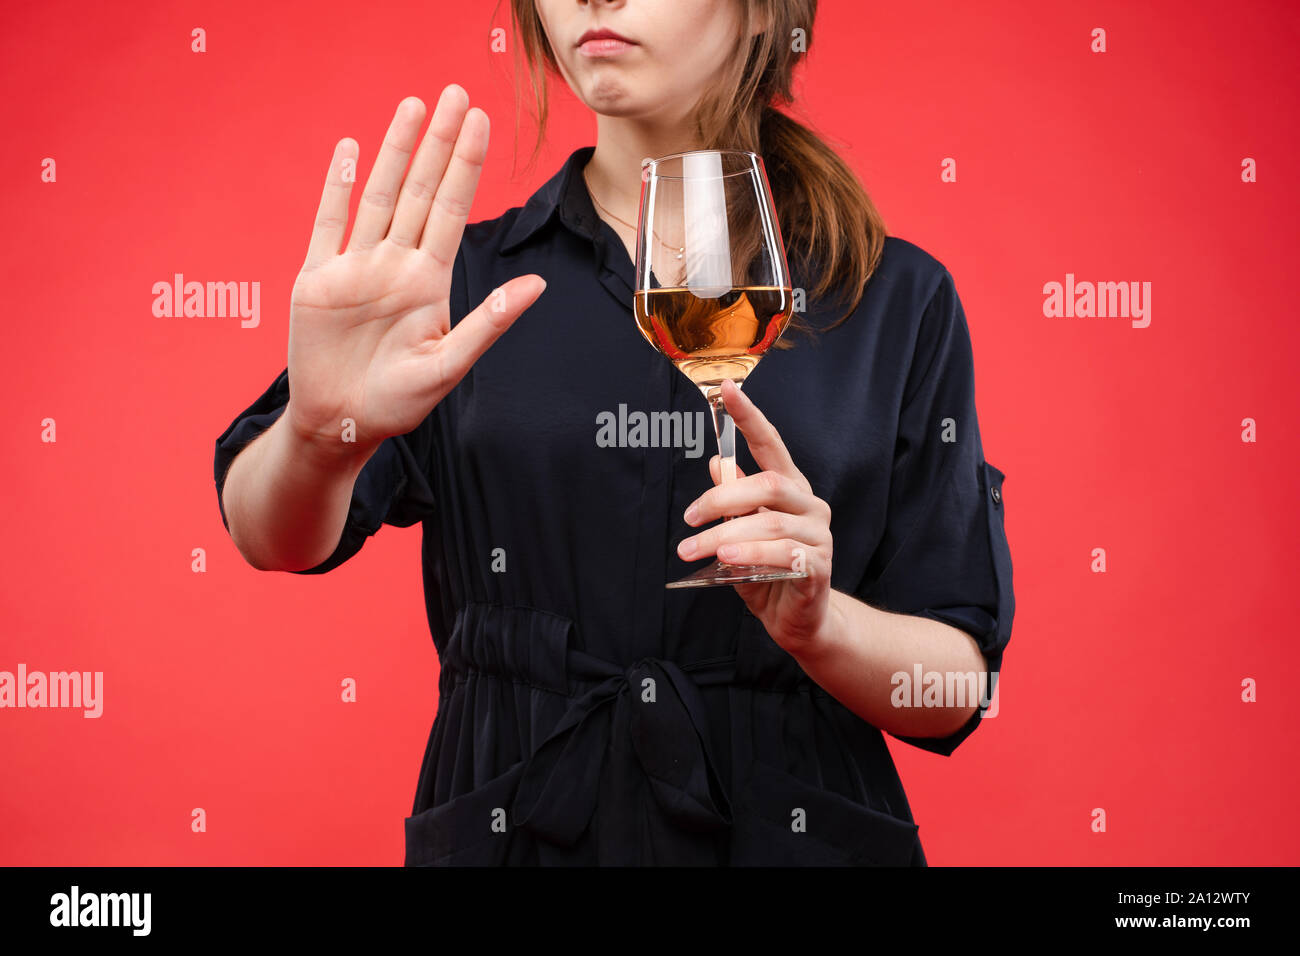 https://c8.alamy.com/comp/2A12WTY/woman-with-a-glass-of-wine-gesturing-hand-with-stop-signisolate-over-red-background-2A12WTY.jpg